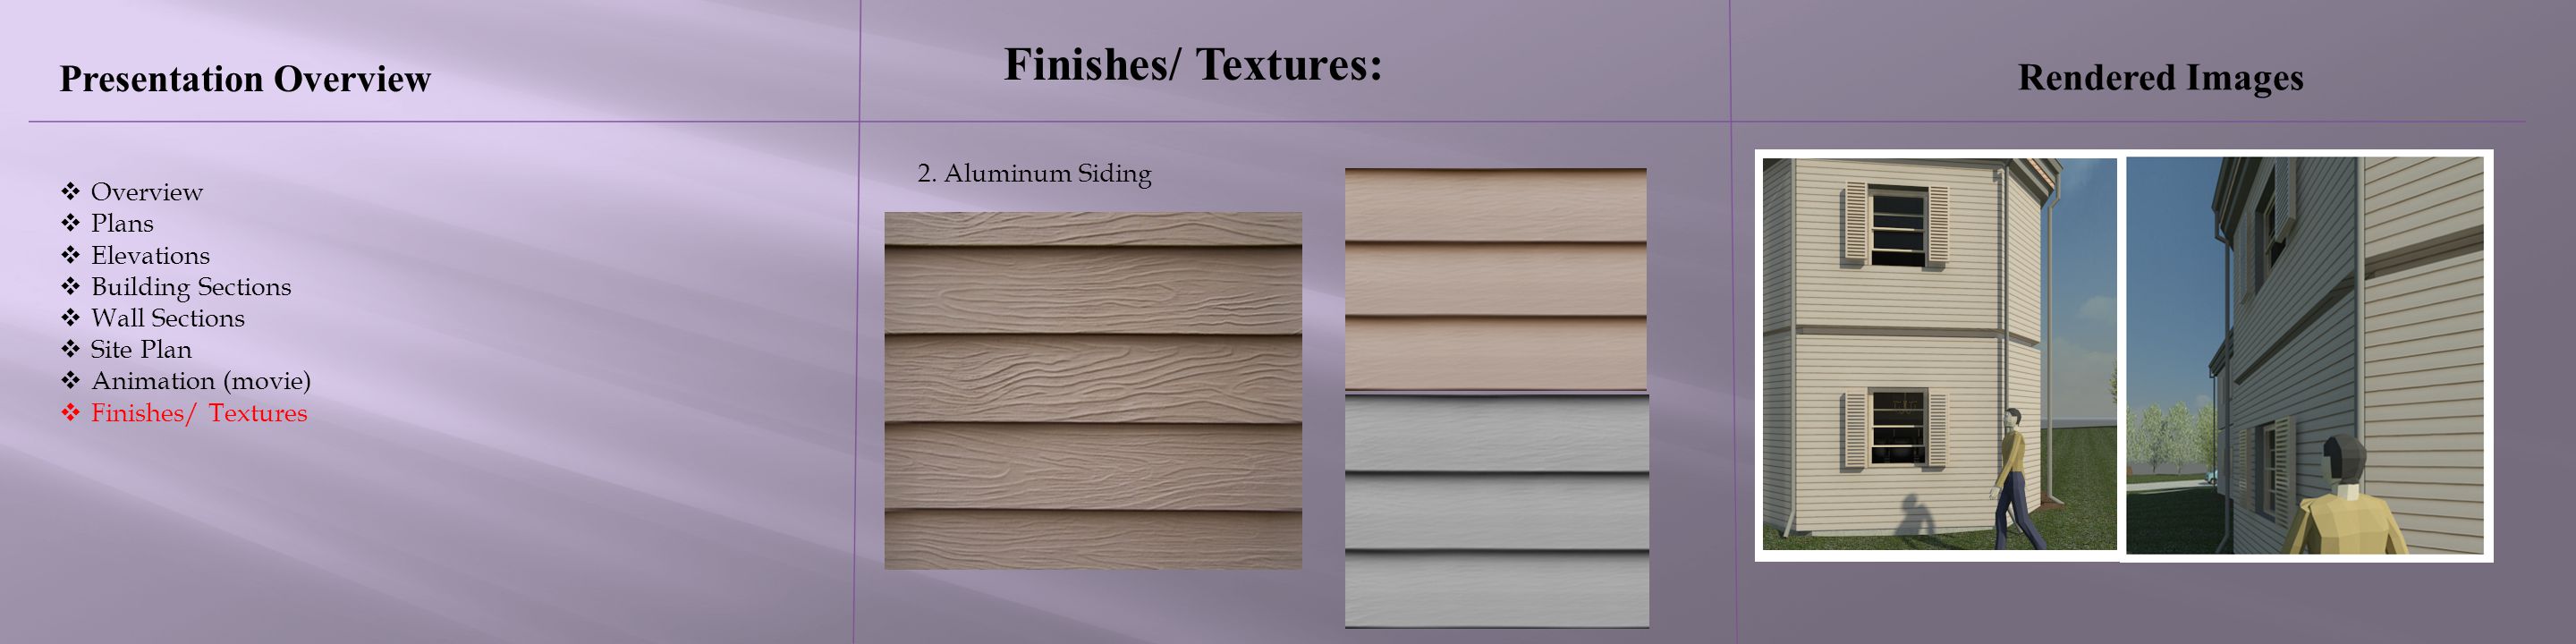 Finishes/ Textures: Presentation Overview Rendered Images